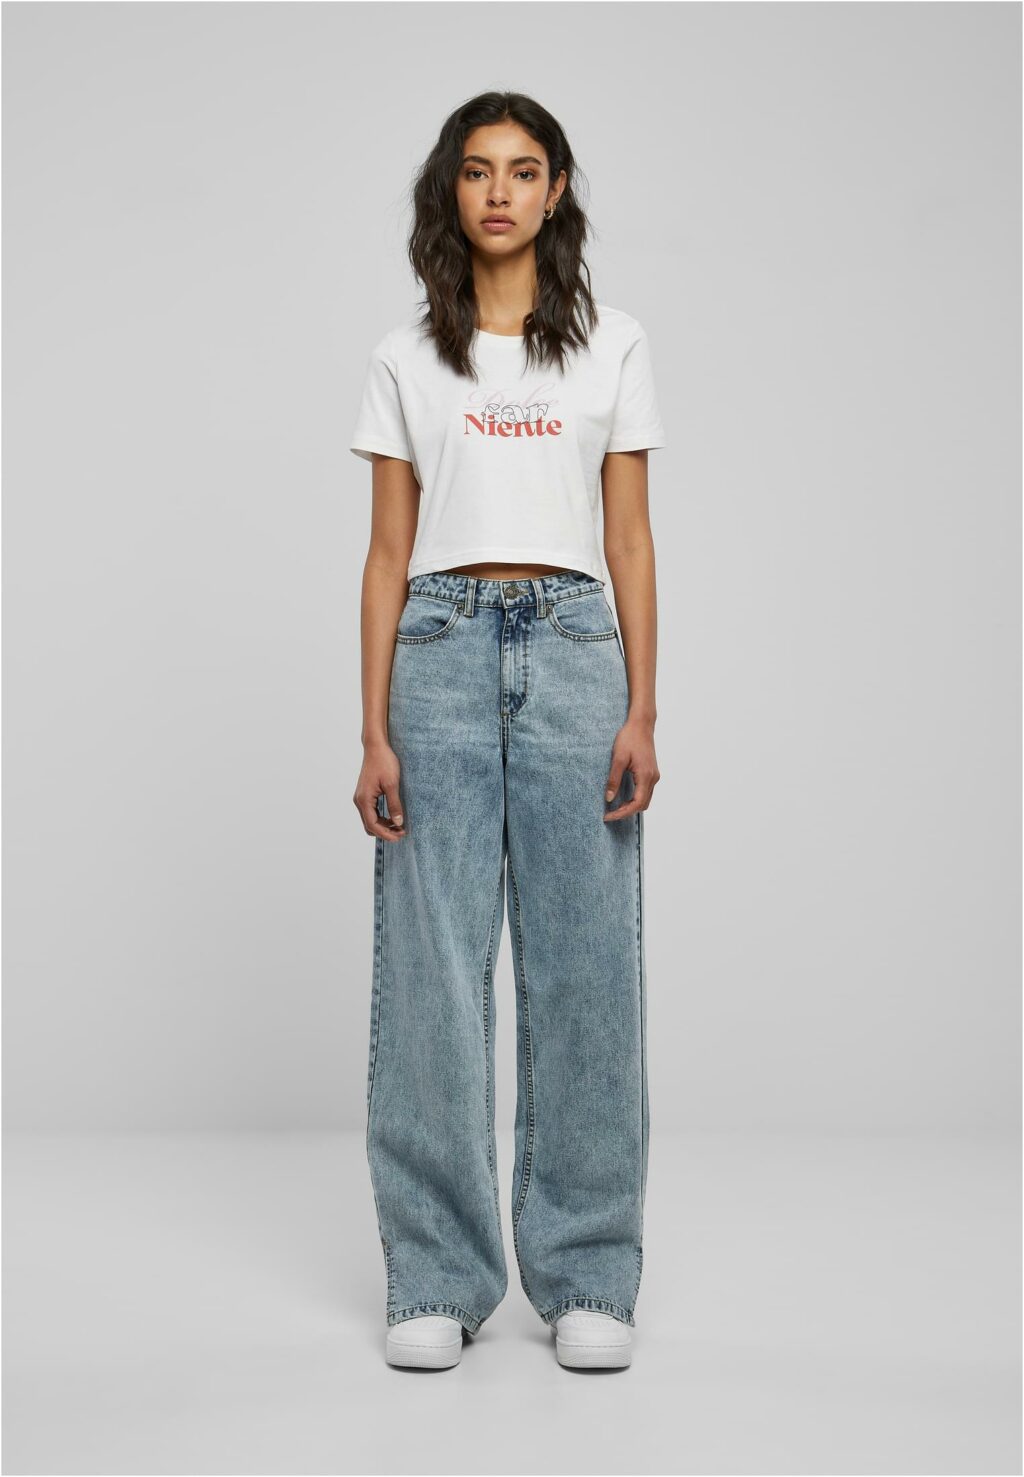 Dolce Far Niente Cropped Tee white BE066